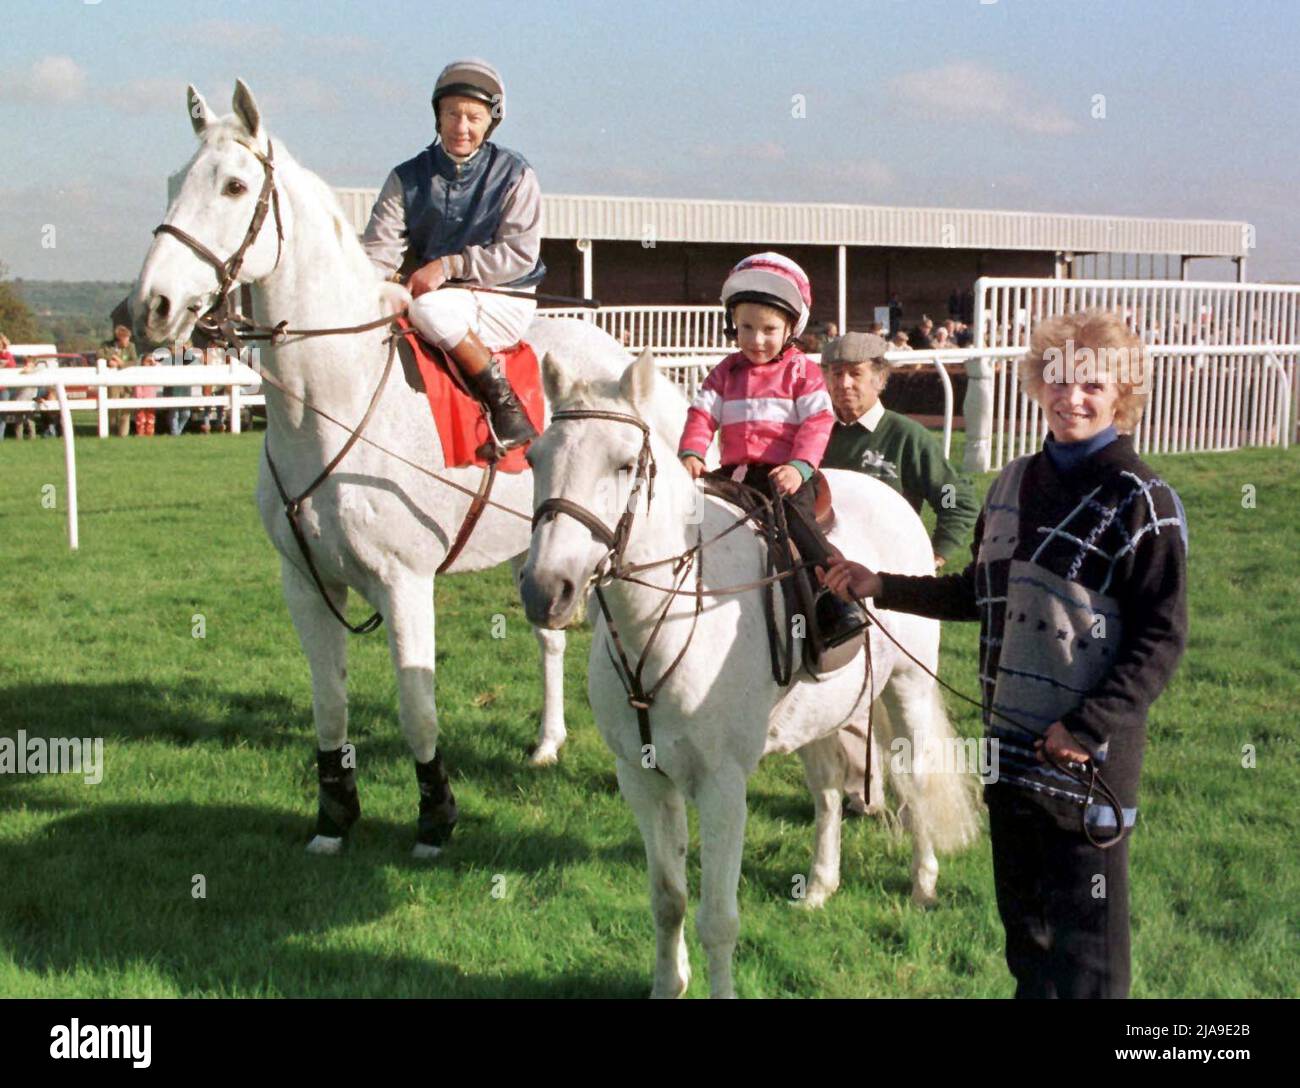 File photo dated 23-10-1997 of Lester Piggott taking part in a celebrity parade aboard Desert Orchid at Wincanton, with his son Jamie, who took part on a pony. Lester Piggott, whose Classic haul included nine Derby victories, has died at the age of 86, his son-in-law William Haggas has announced.. Issue date: Sunday May 29, 2022. Stock Photo